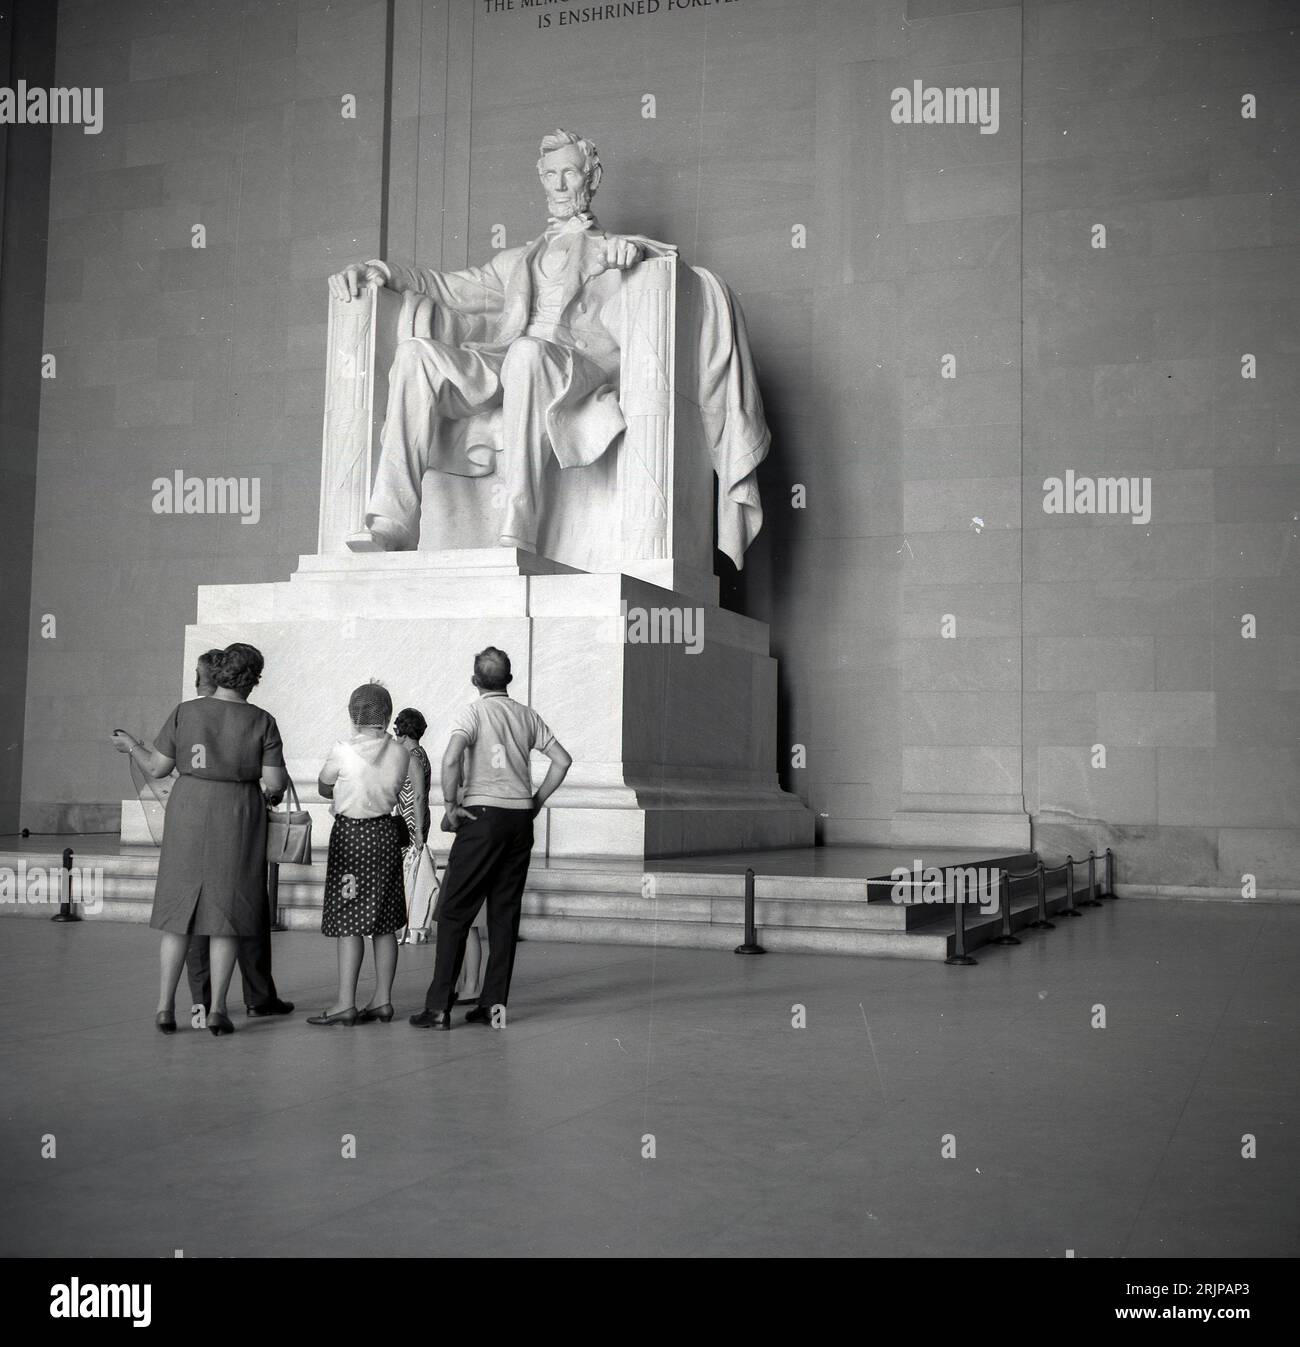 1960s, historical, a family looking at the statue of Arabham Lincoln inside the Lincoln Memorial on the National Mail, Washington DC, USA. Designed by Daniel Chester French, the large marble statue of the 16th president was completed in 1920, with a formal unveiling in 1922. Stock Photo